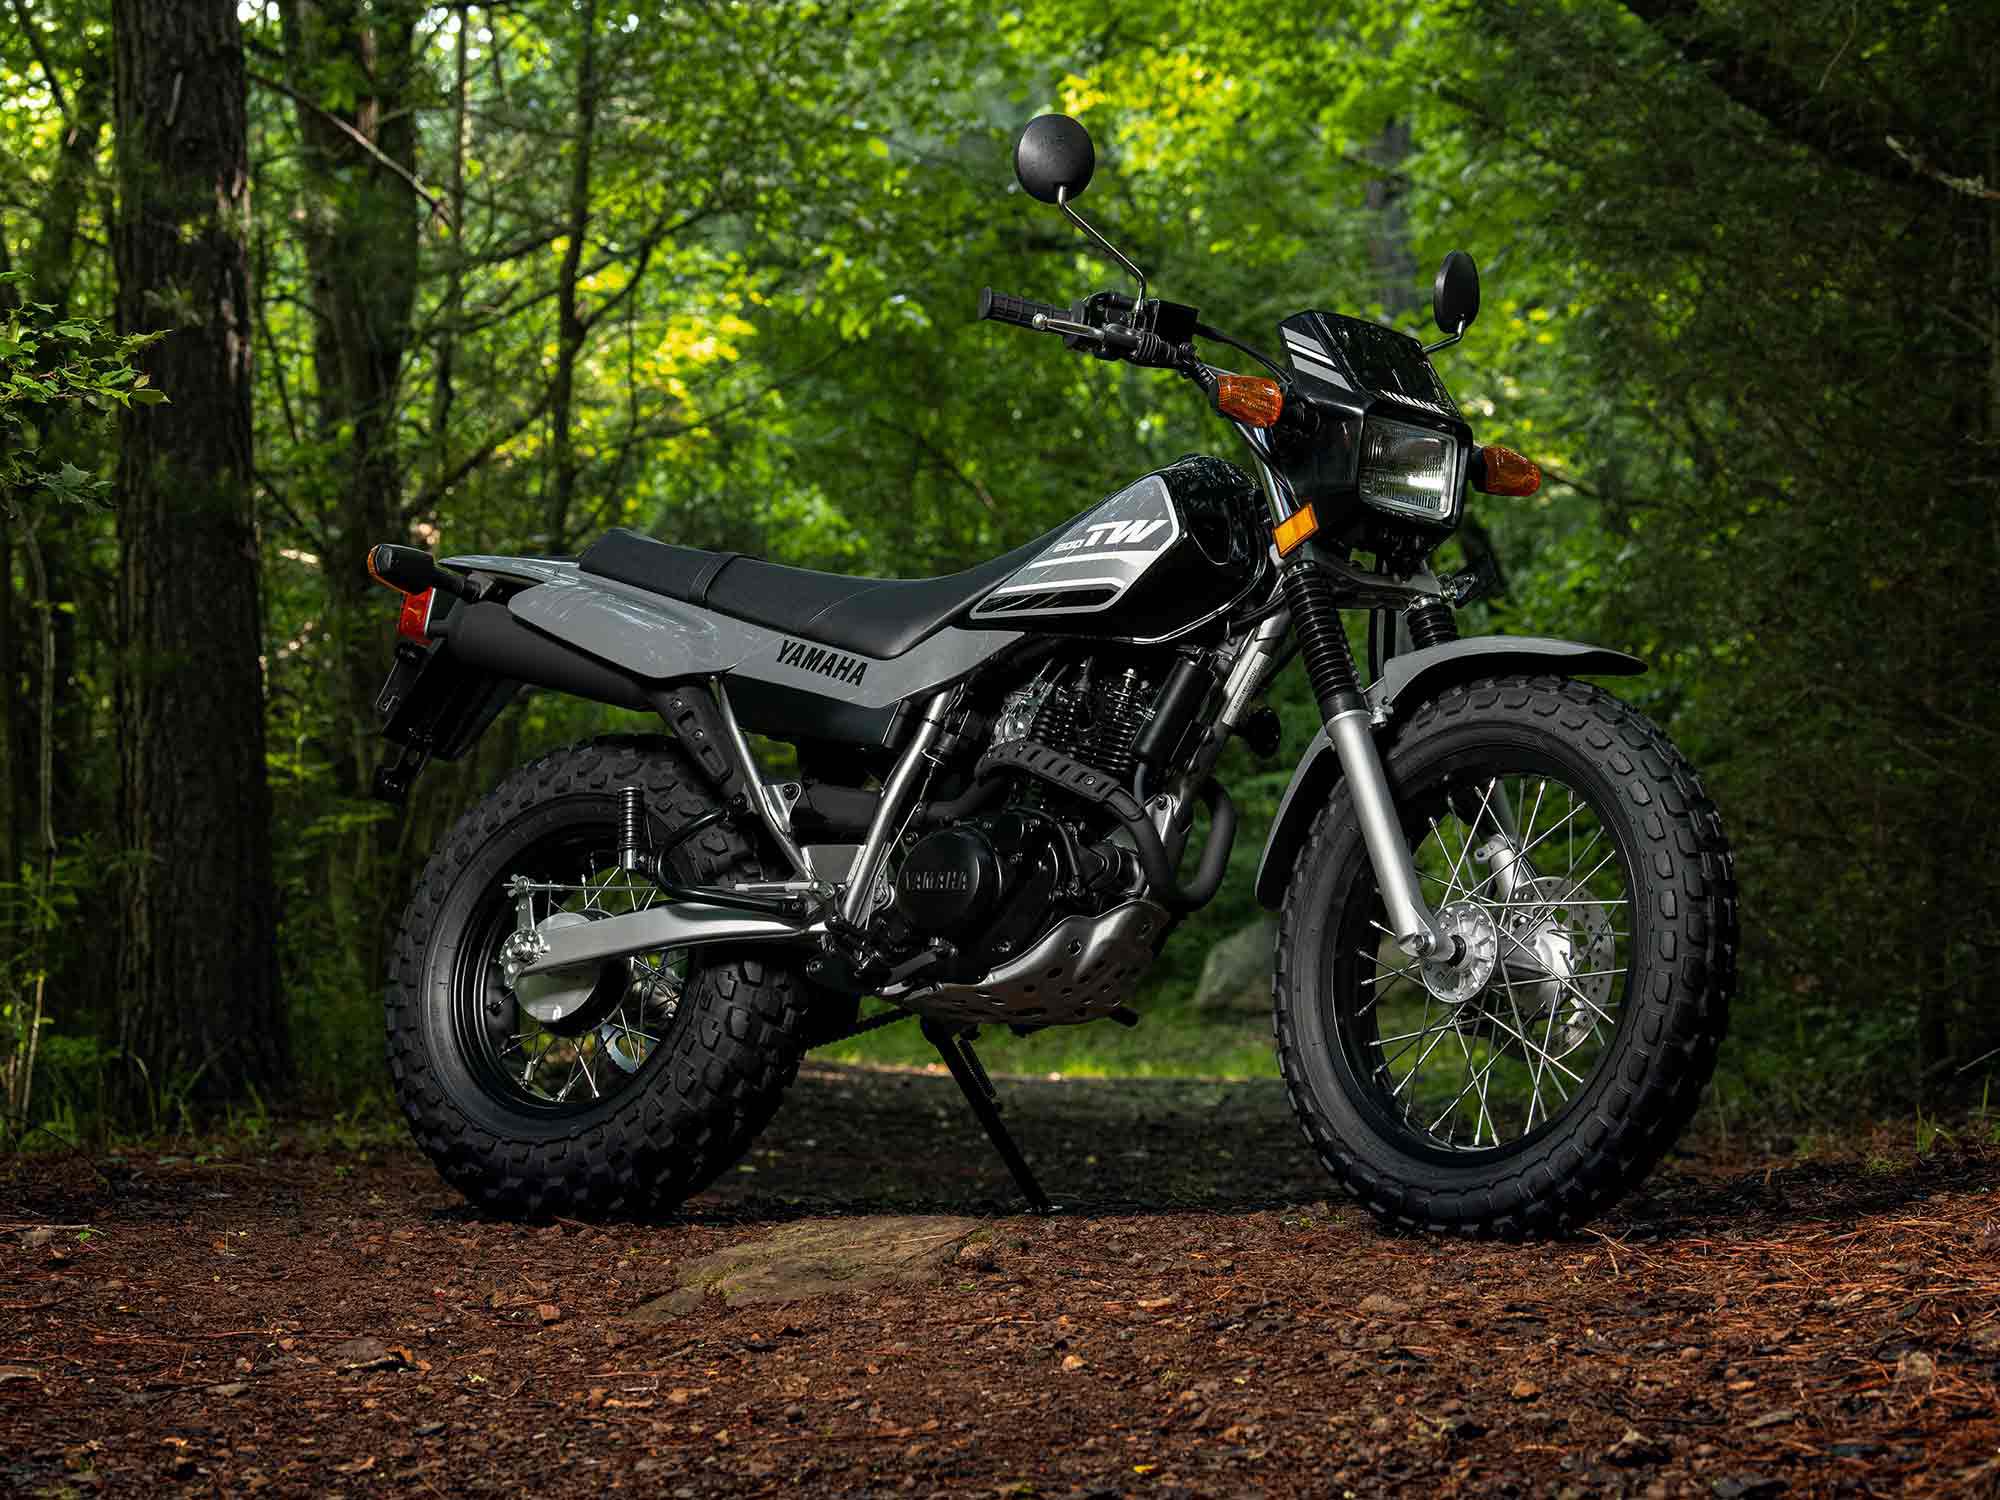 The Yamaha TW200 (TW being short for Trail Way) returns in all its fat-tire glory.